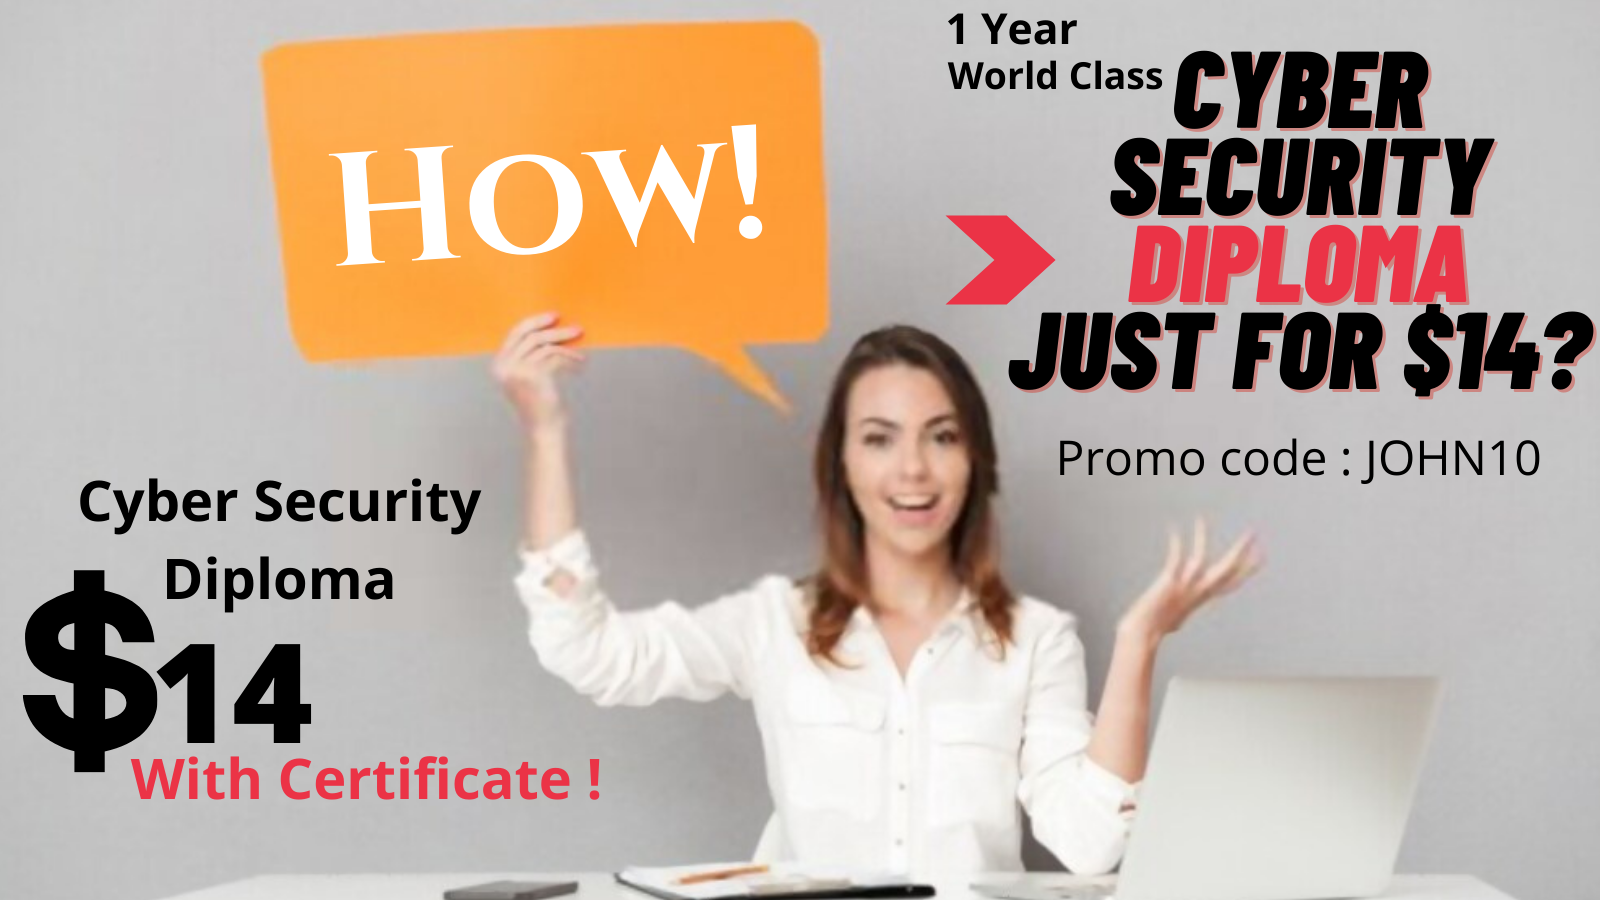 diploma in cyber security course just for $14?